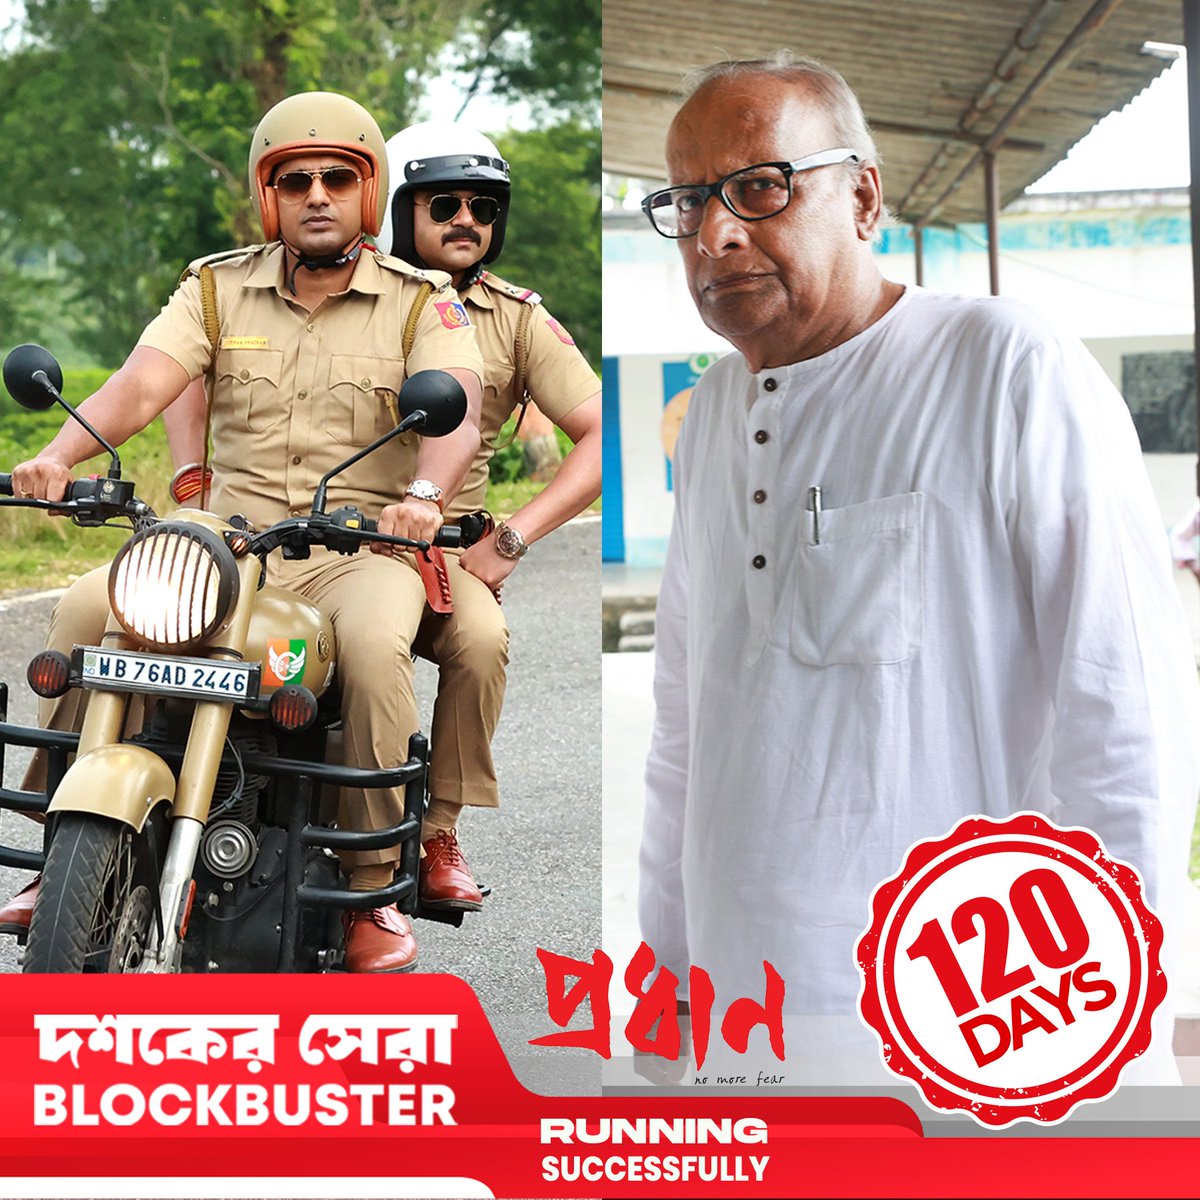 120 Days and #Pradhan still continues its run at the Box Office. Thank you for all the love! Book your tickets: in.bookmyshow.com/movies/pradhan… #NoMoreFear #BookNow #RunningSuccessfully #Blockbuster